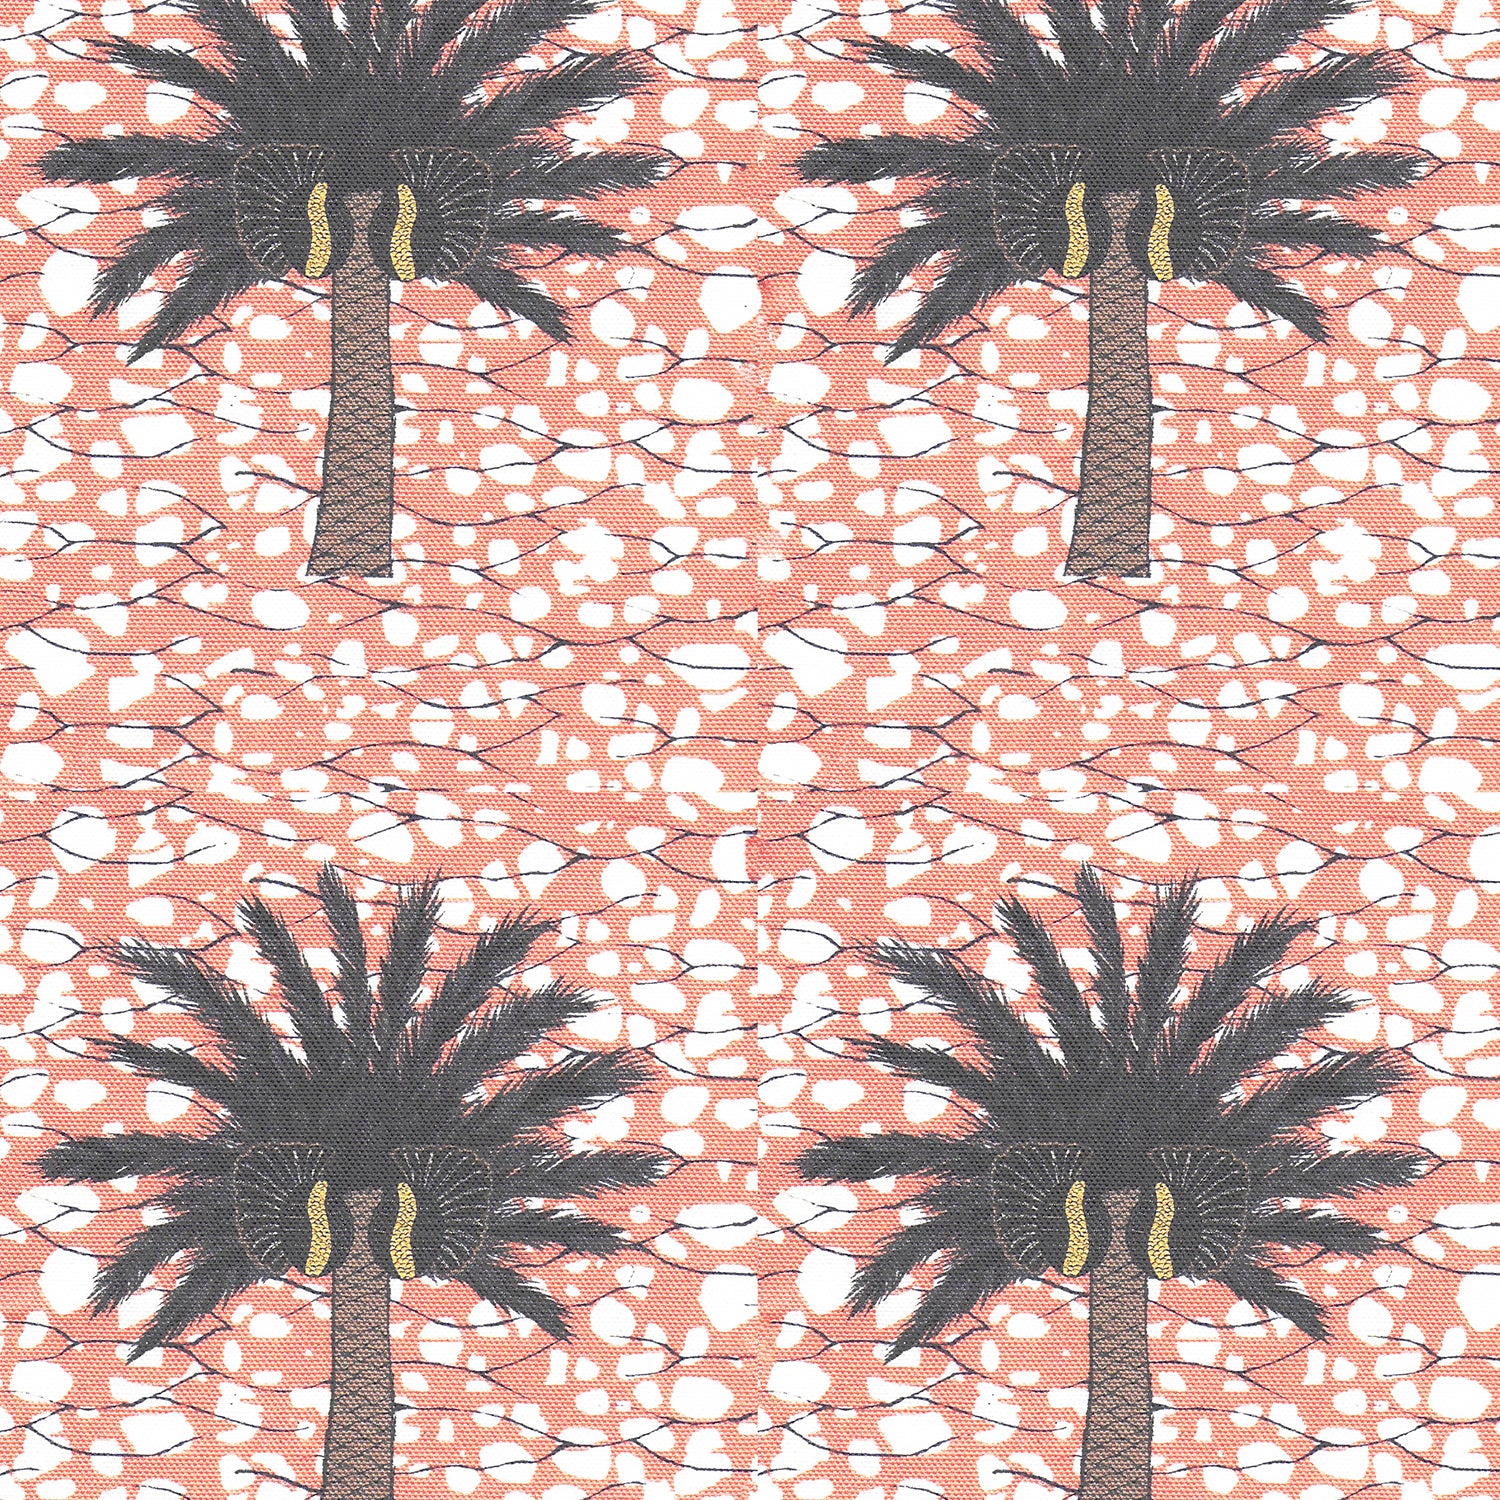 Detail of fabric in a repeating palm tree print on a mottled field in shades of brown, gray, pink and white.